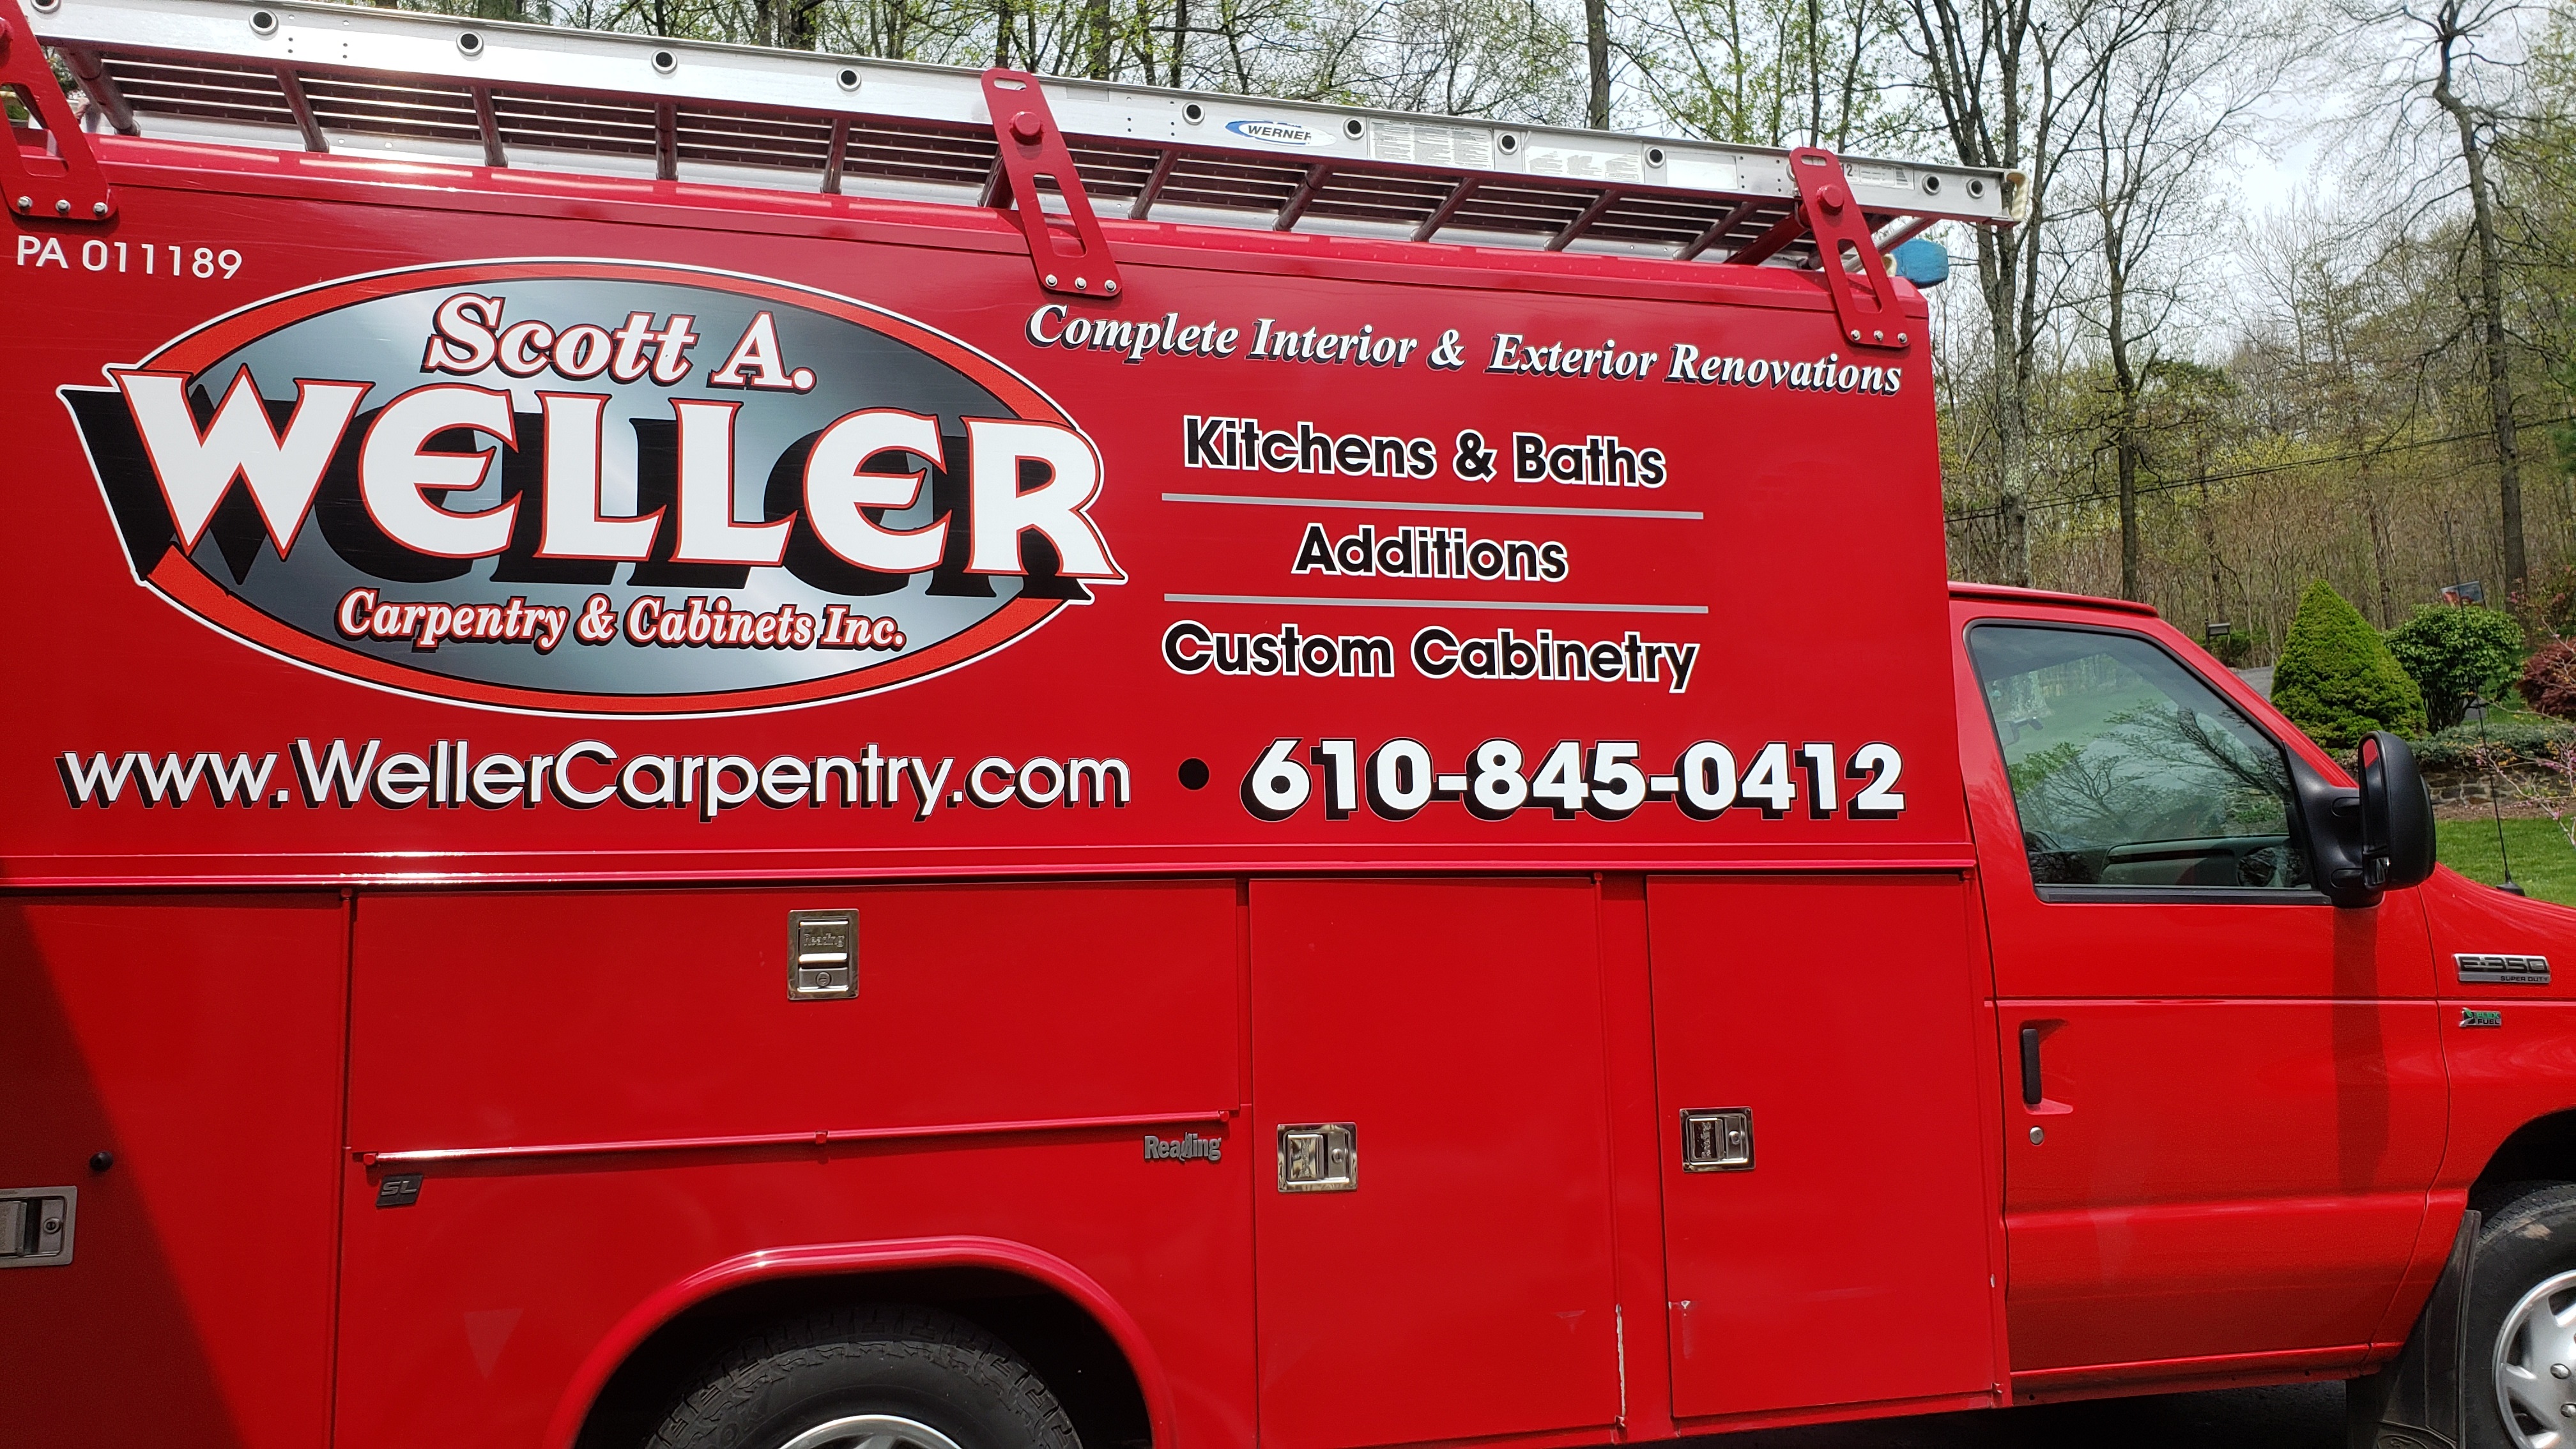 WELCOME TO SCOTT A. WELLER Carpentry & Cabinets Inc.!